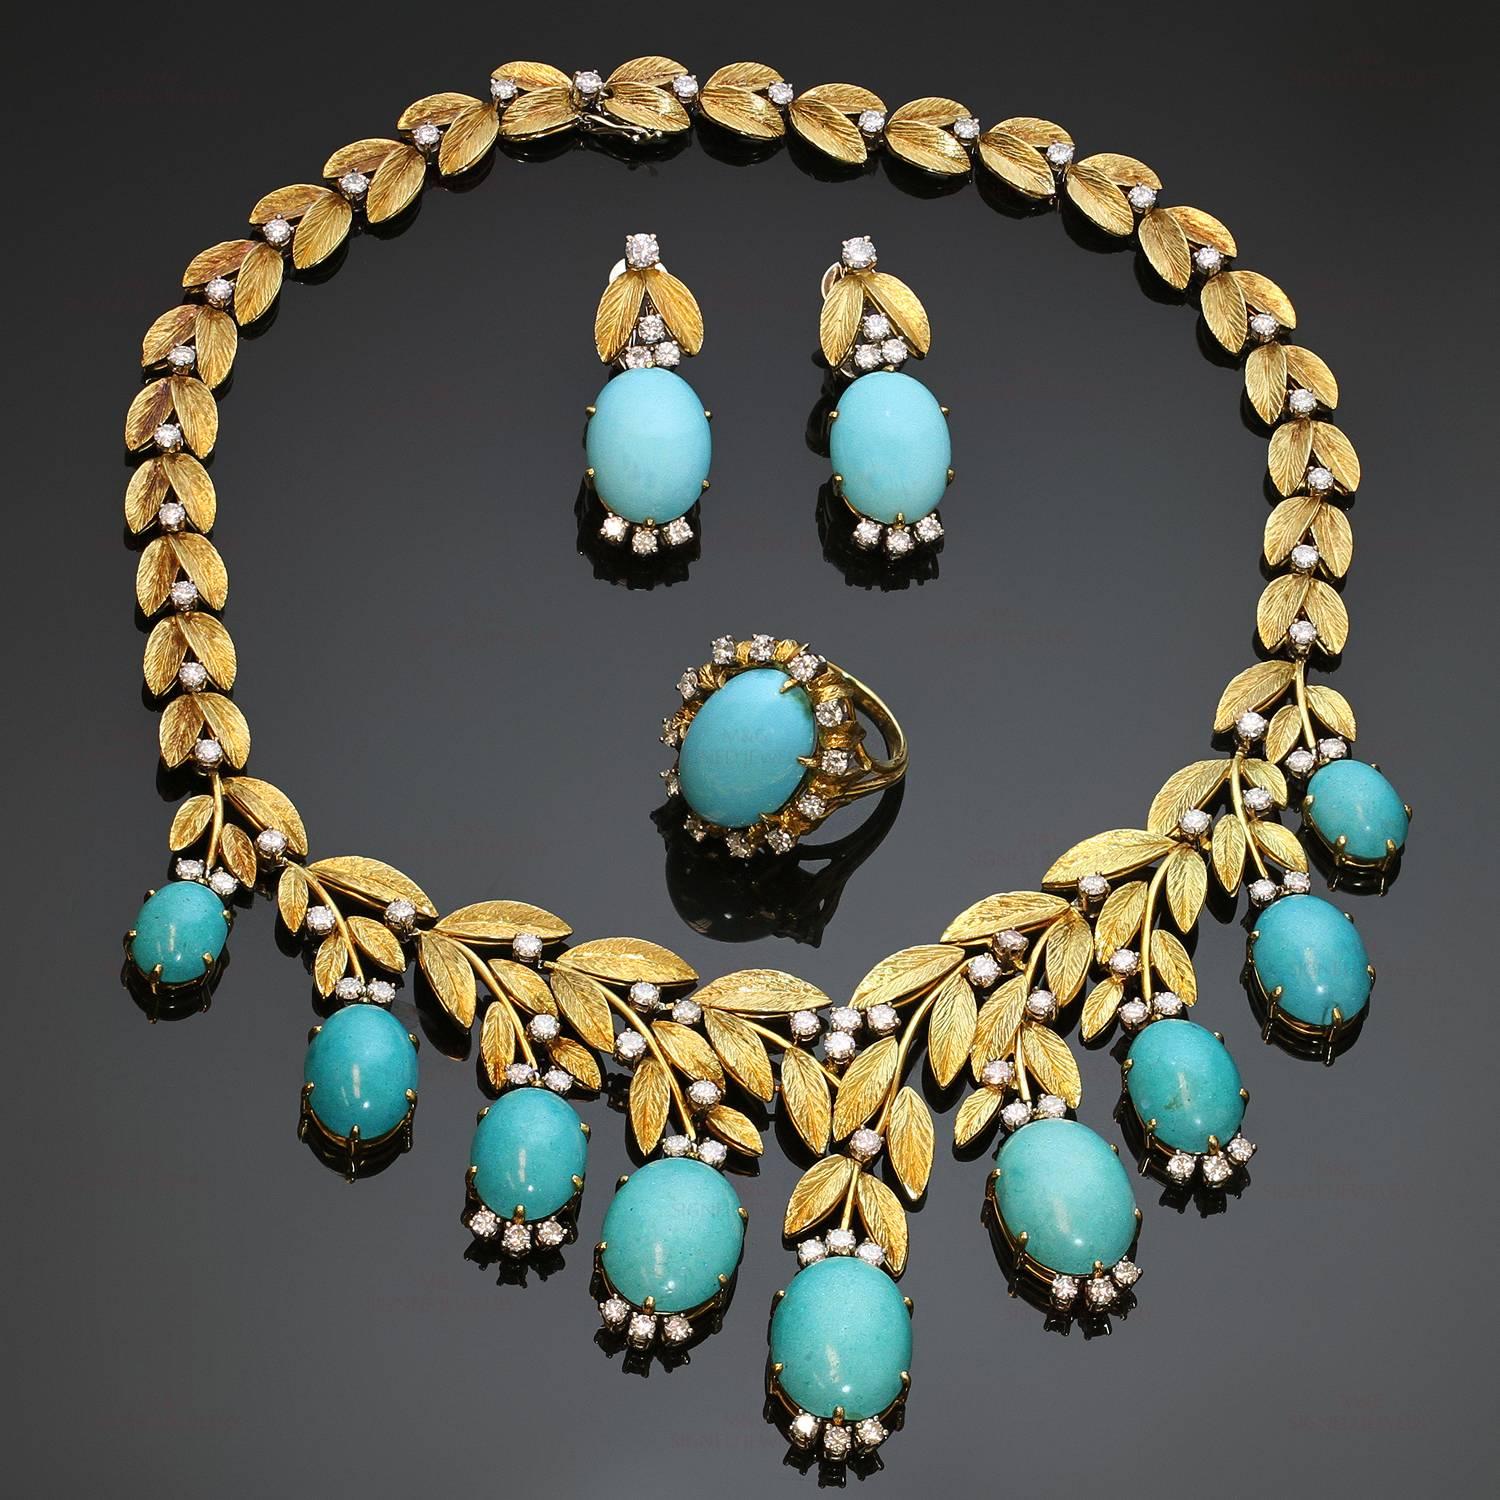 This fabulous vintage suite features a foliate design crafted in 18k yellow gold and set with oval cabochon turquoise stones and brilliant-cut round diamonds of an estimated 10.0 carats. The jewelry set consists of a necklace with chased leaf links